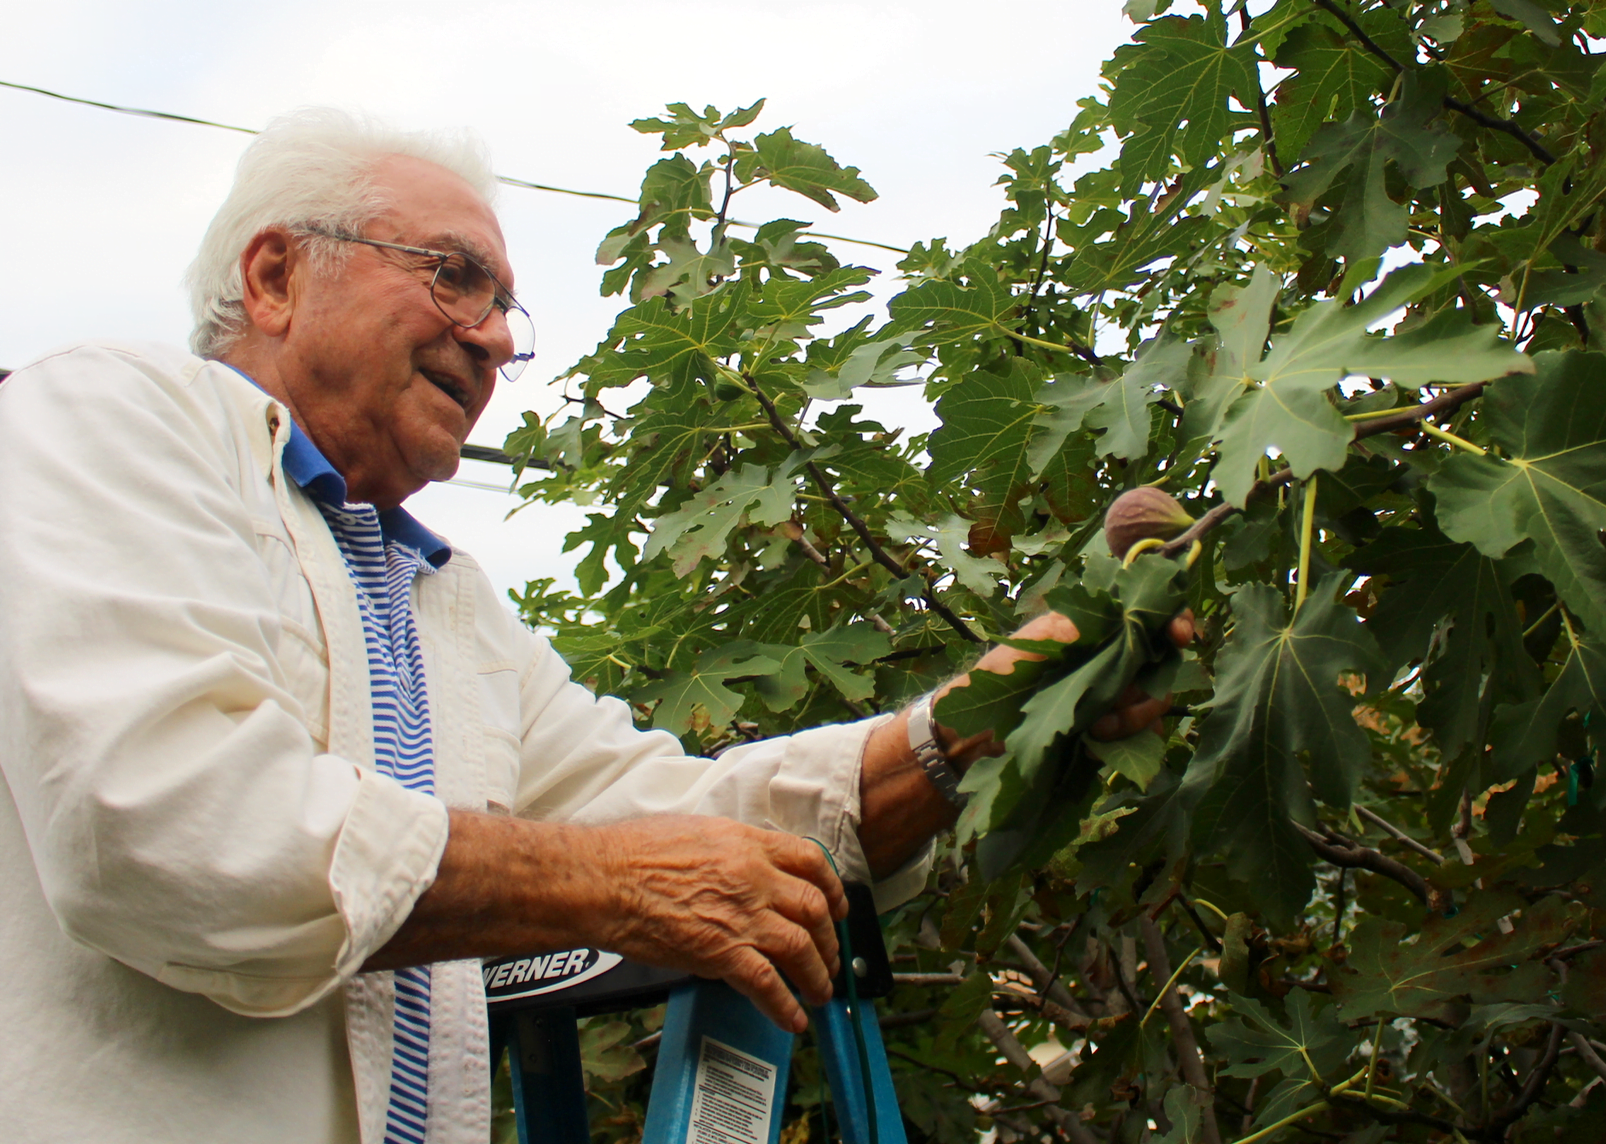 Tony DeVita checking on his fig tree in Pemberwick. Oct 13, 2017 Photo: Leslie Yager